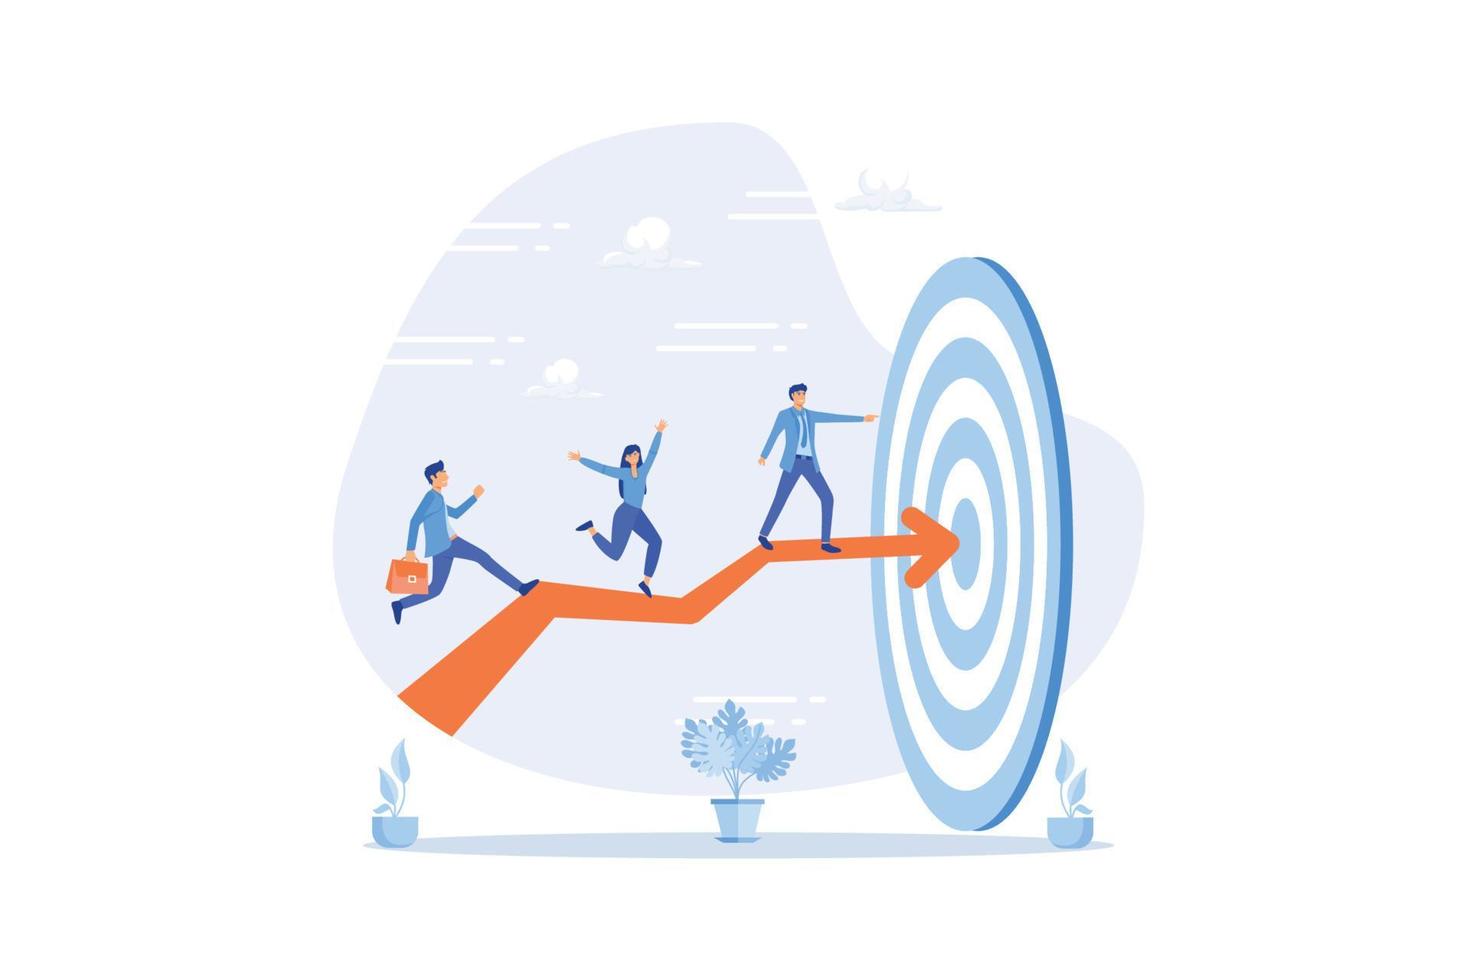 Team target or achievement, teamwork or leadership to lead to achieve goal, business direction or success, career path or growth concept, flat vector modern illustration